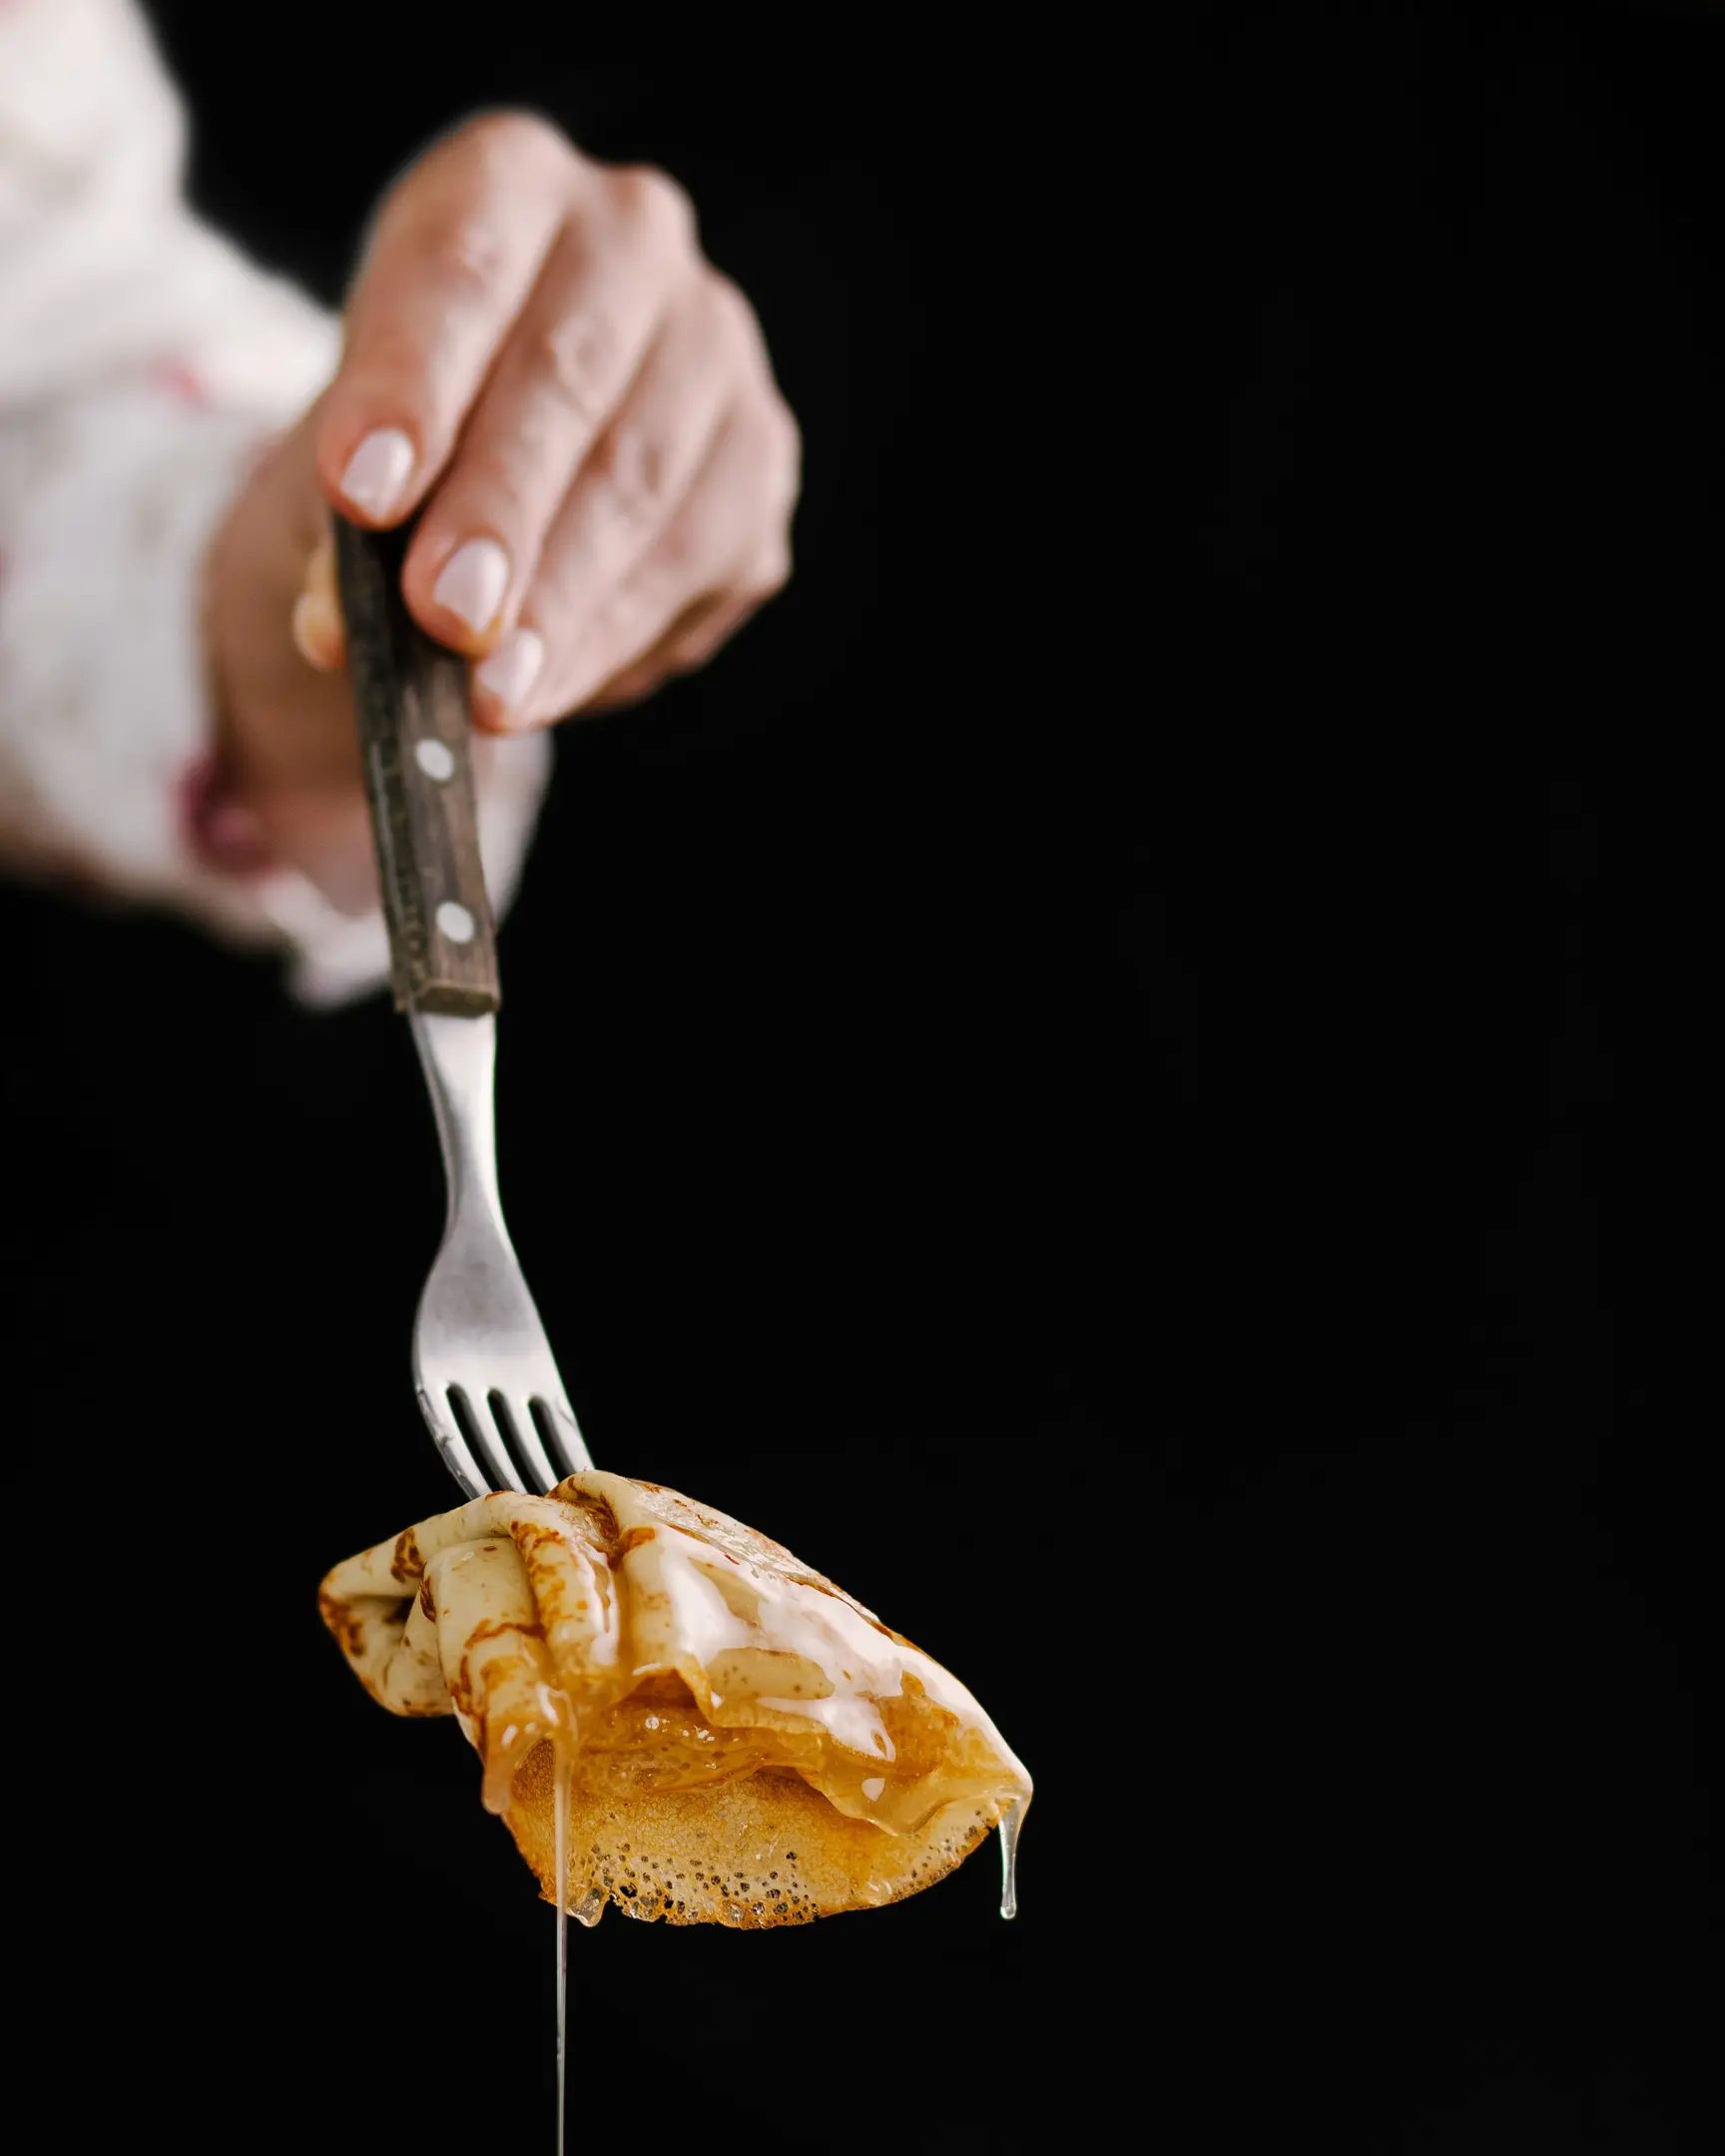 A woman holds a fork in her hand, on which a pancake has been pricked. A woman holds a fork in her hand, on which a pancake has been pricked. The pancake is poured with honey. Honey drips from the pancake. Honey glitters in the rays of light.